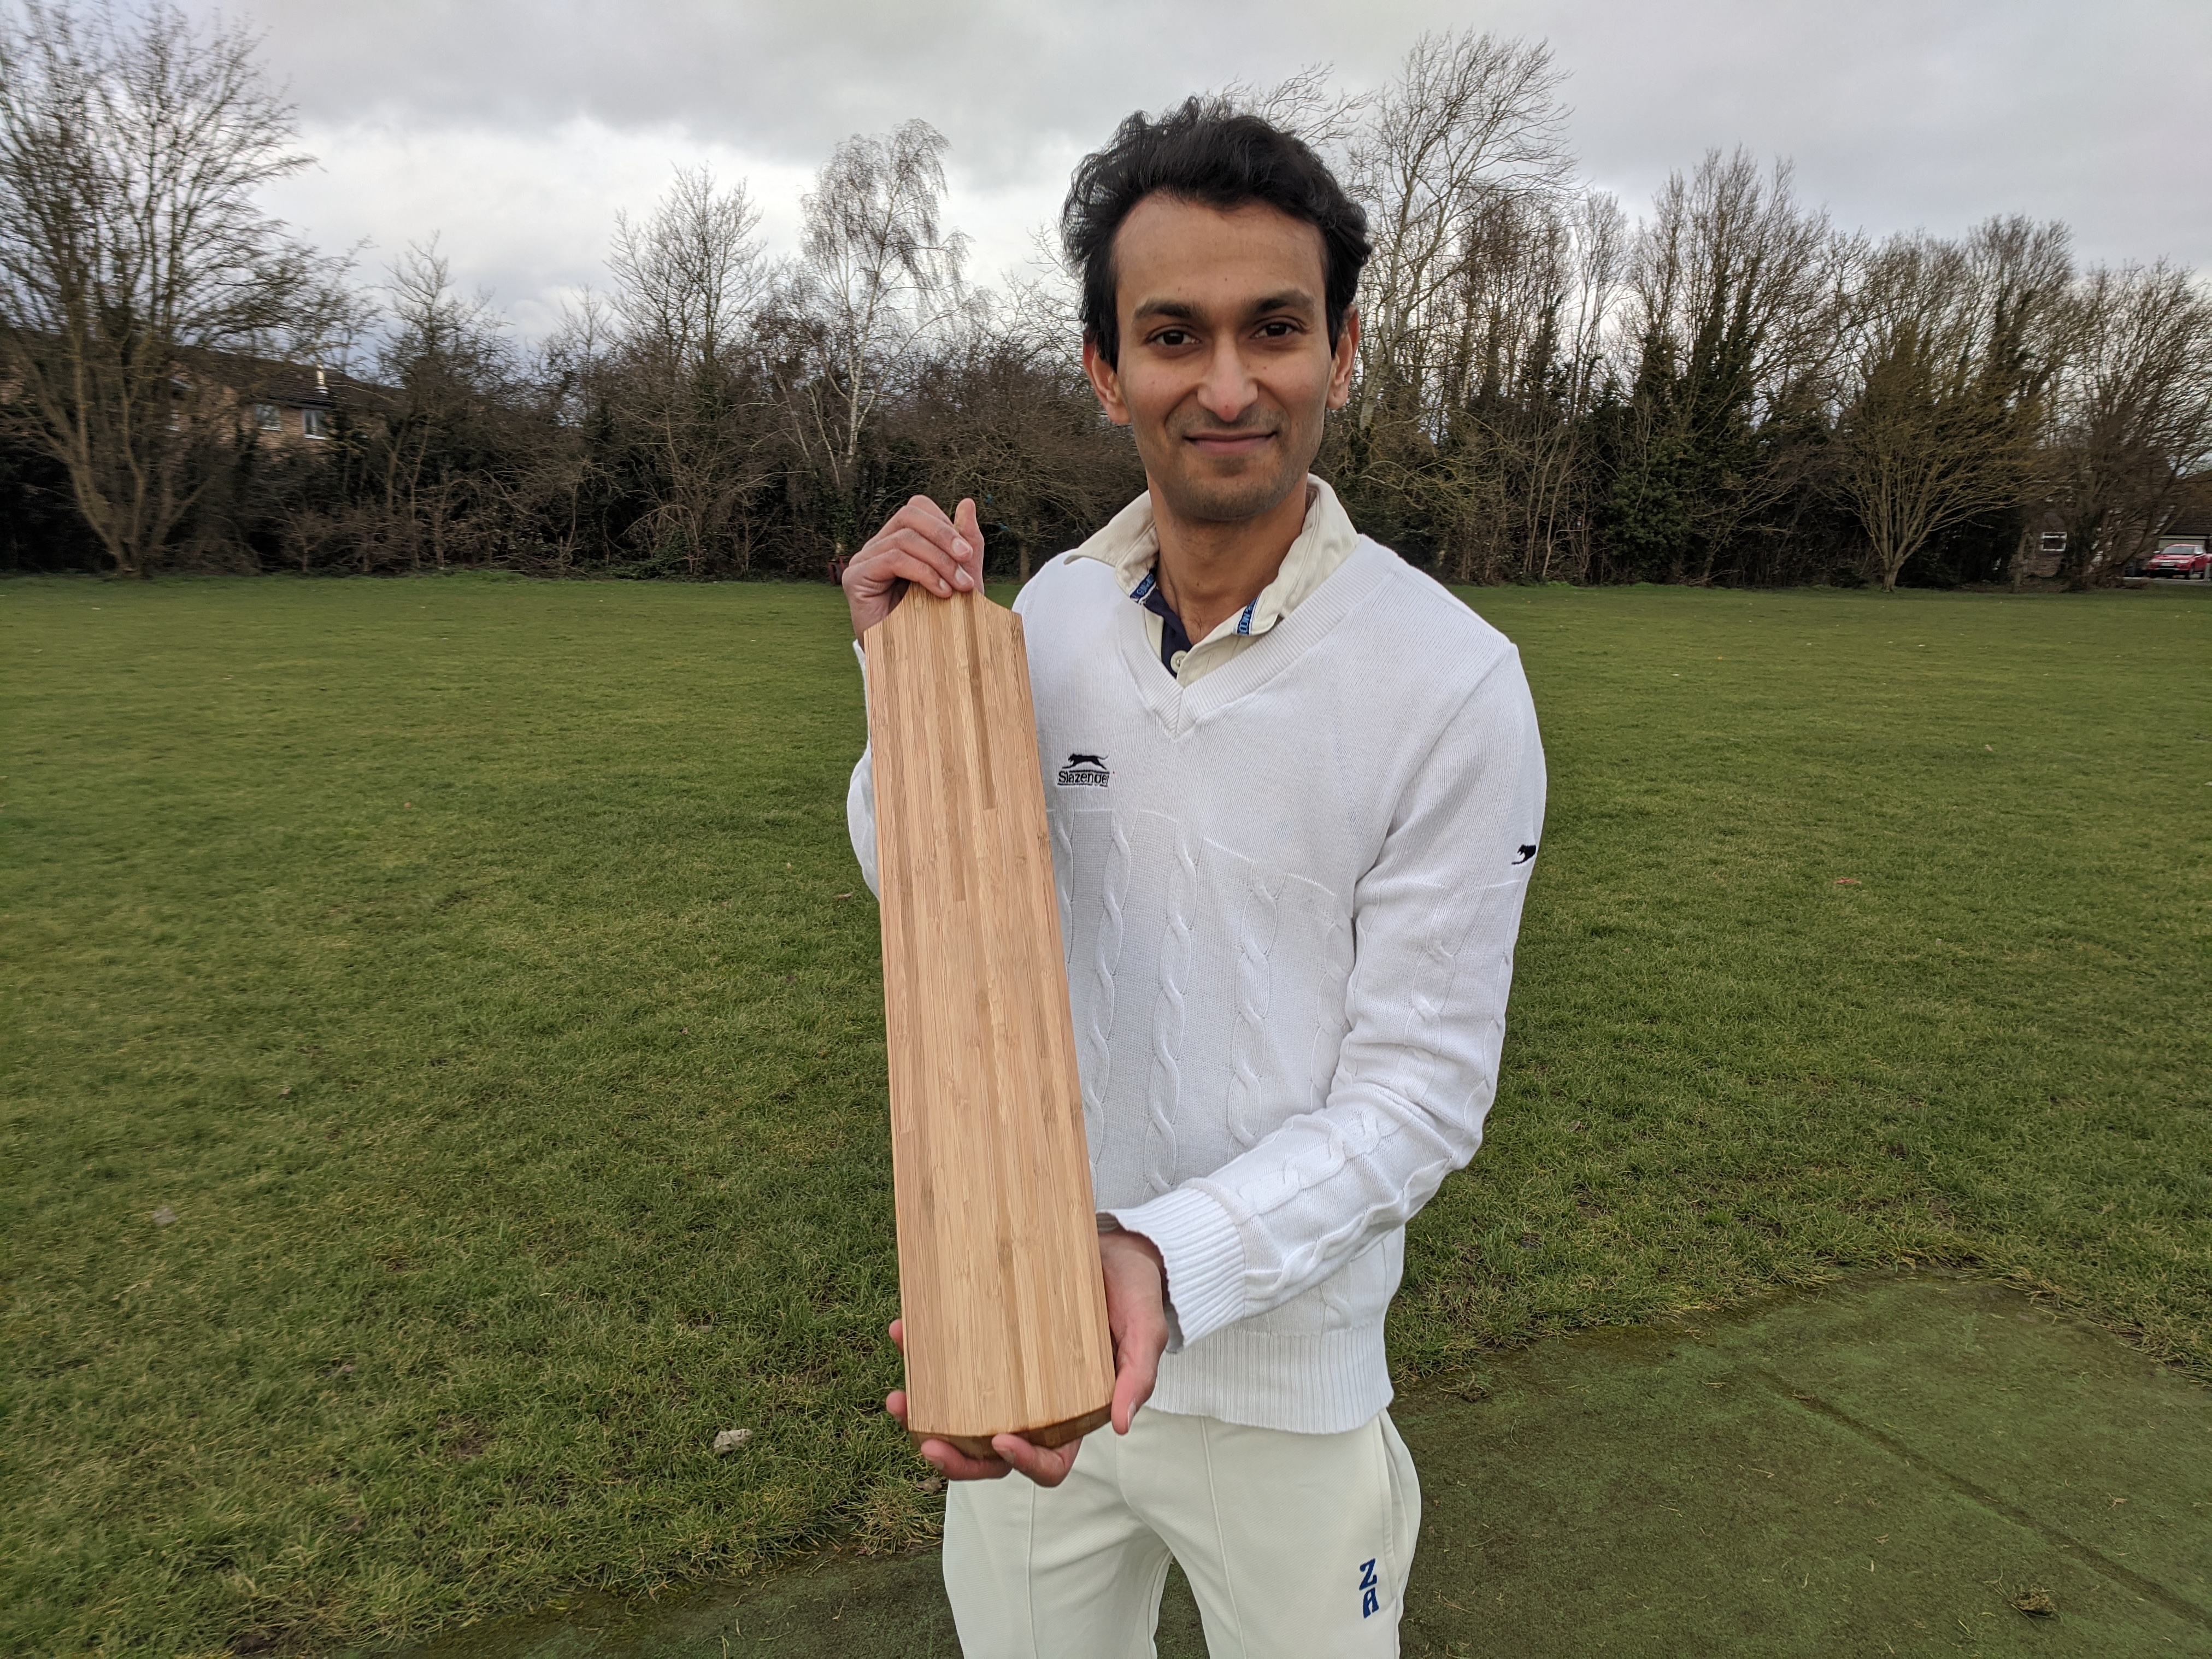 Bamboo is stronger than willow and transfers more power to the cricket ball, according to a study. (Cambridge University/ PA)